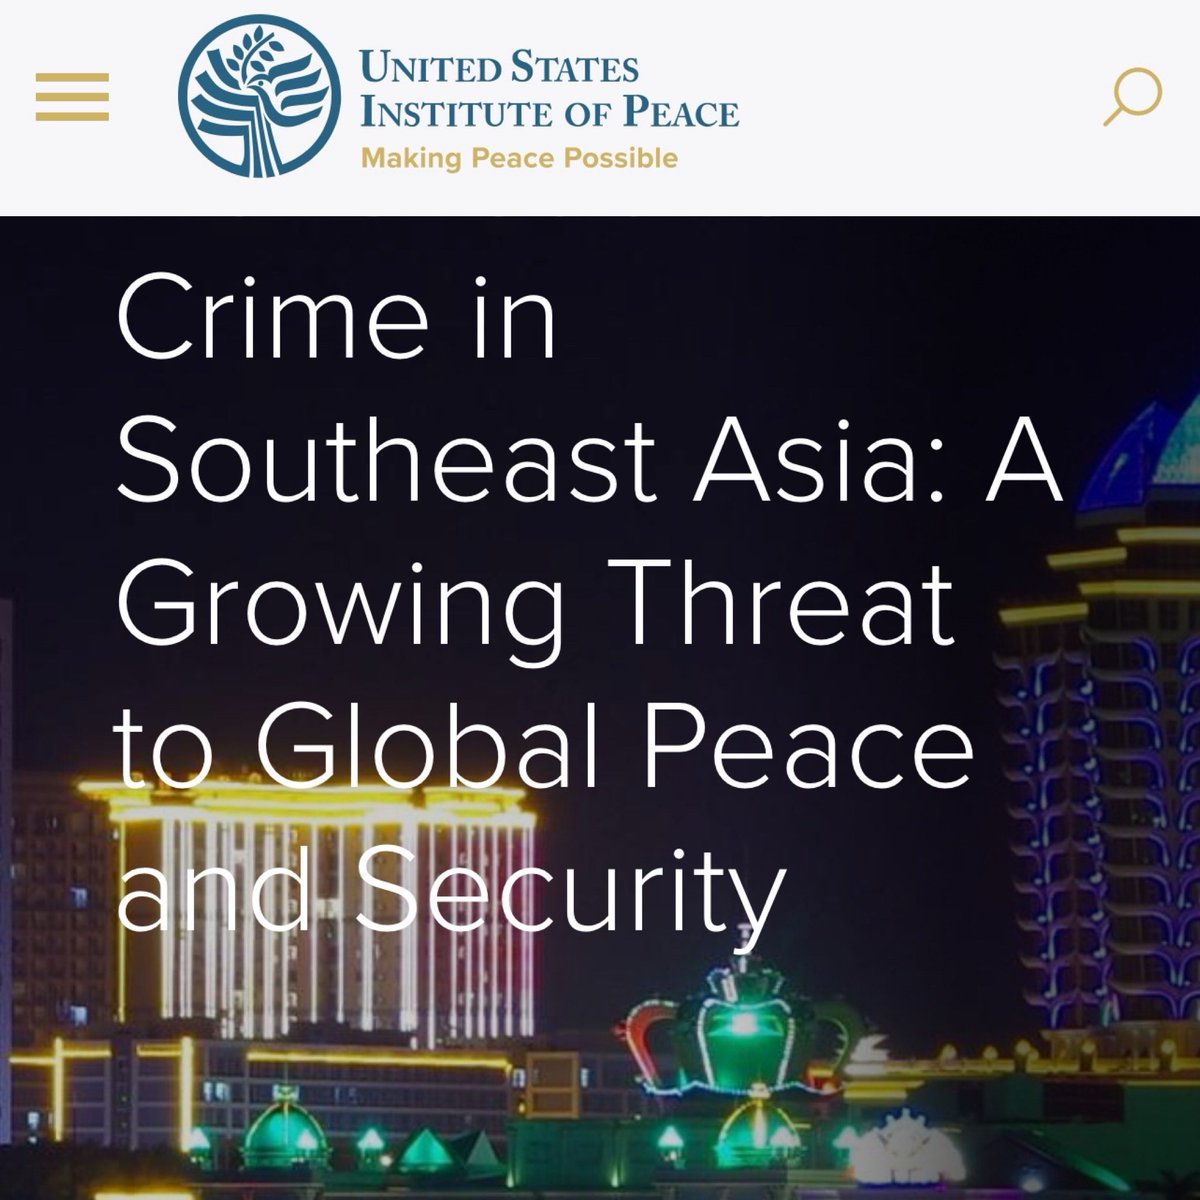 Presenting a report on 'Transnational Crime in Southeast Asia: A Growing Treat to Global Peace and Security' the United States Institute of Peace- @USIP highlighted kidnapping, extortion, money laundering in a $64 billion criminal enterprise spanning countries and continents.